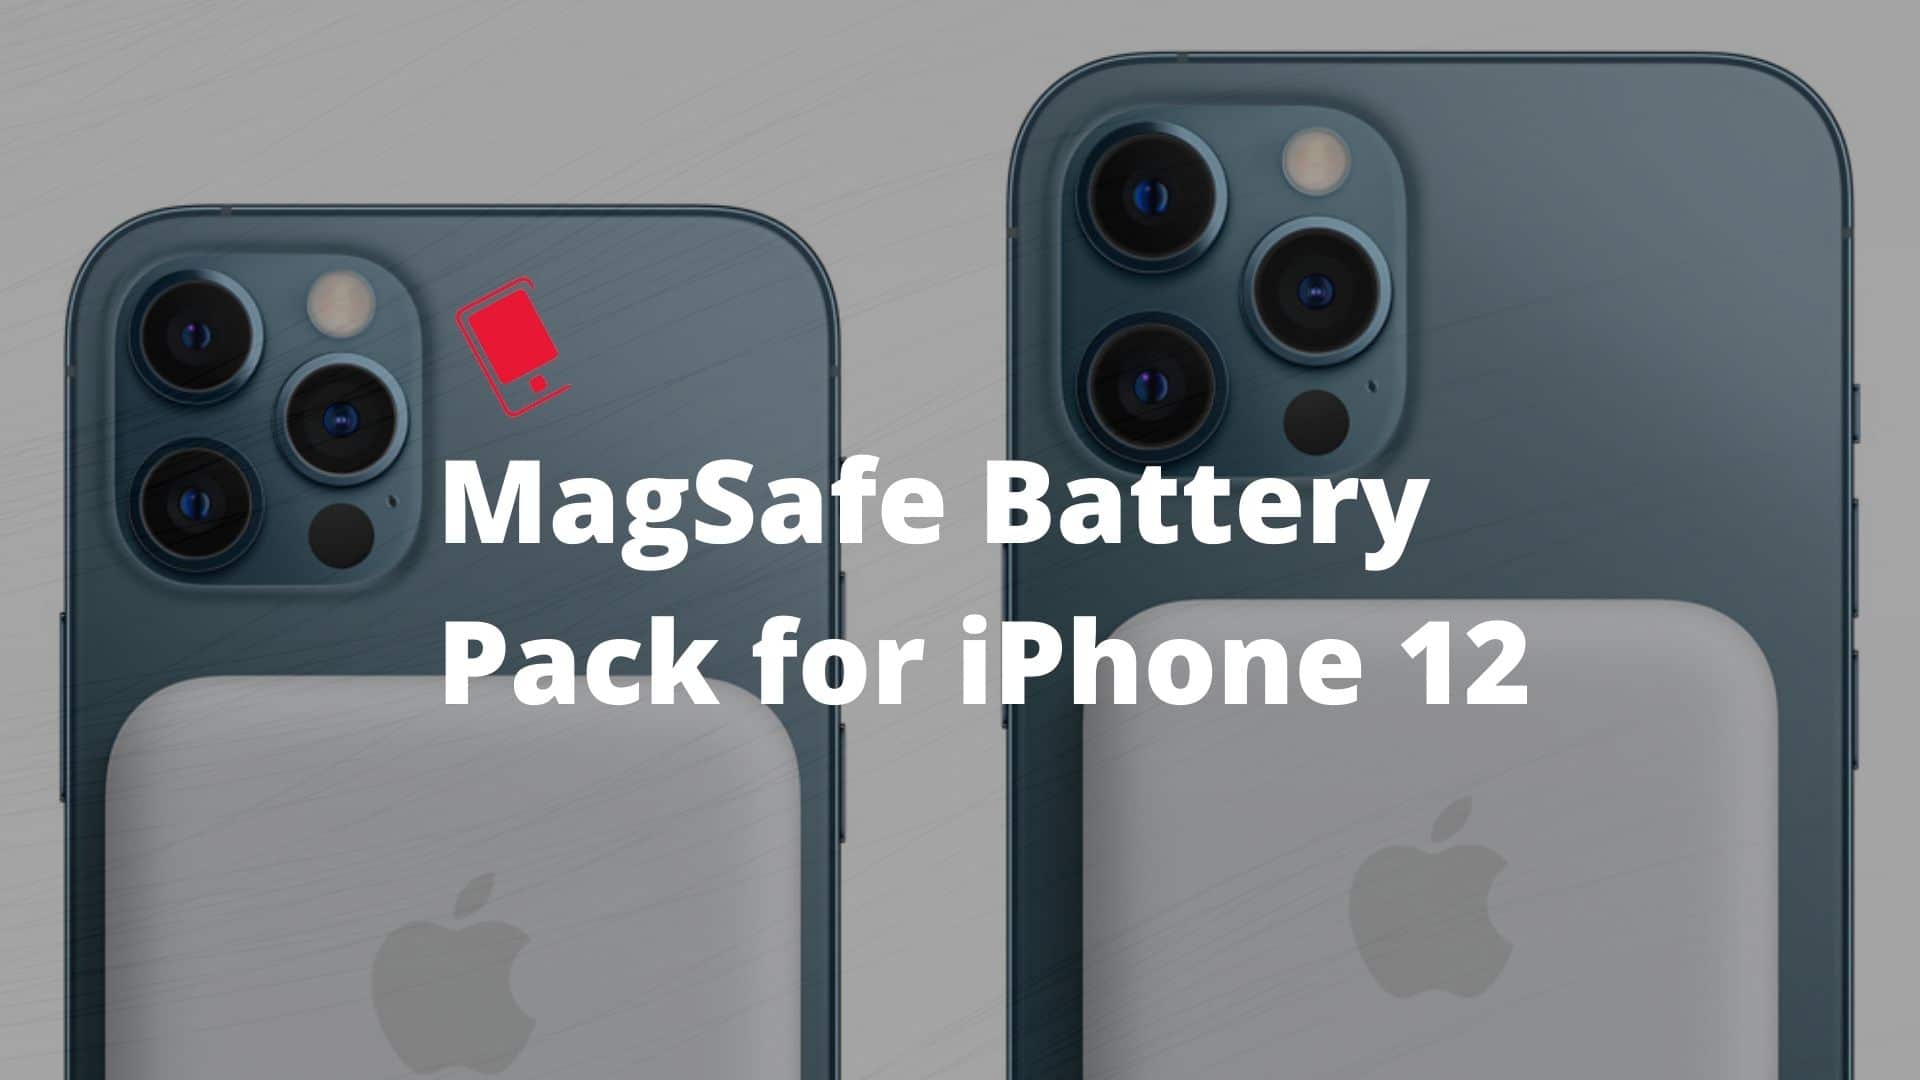 iPhone 12 MagSafe Battery Pack